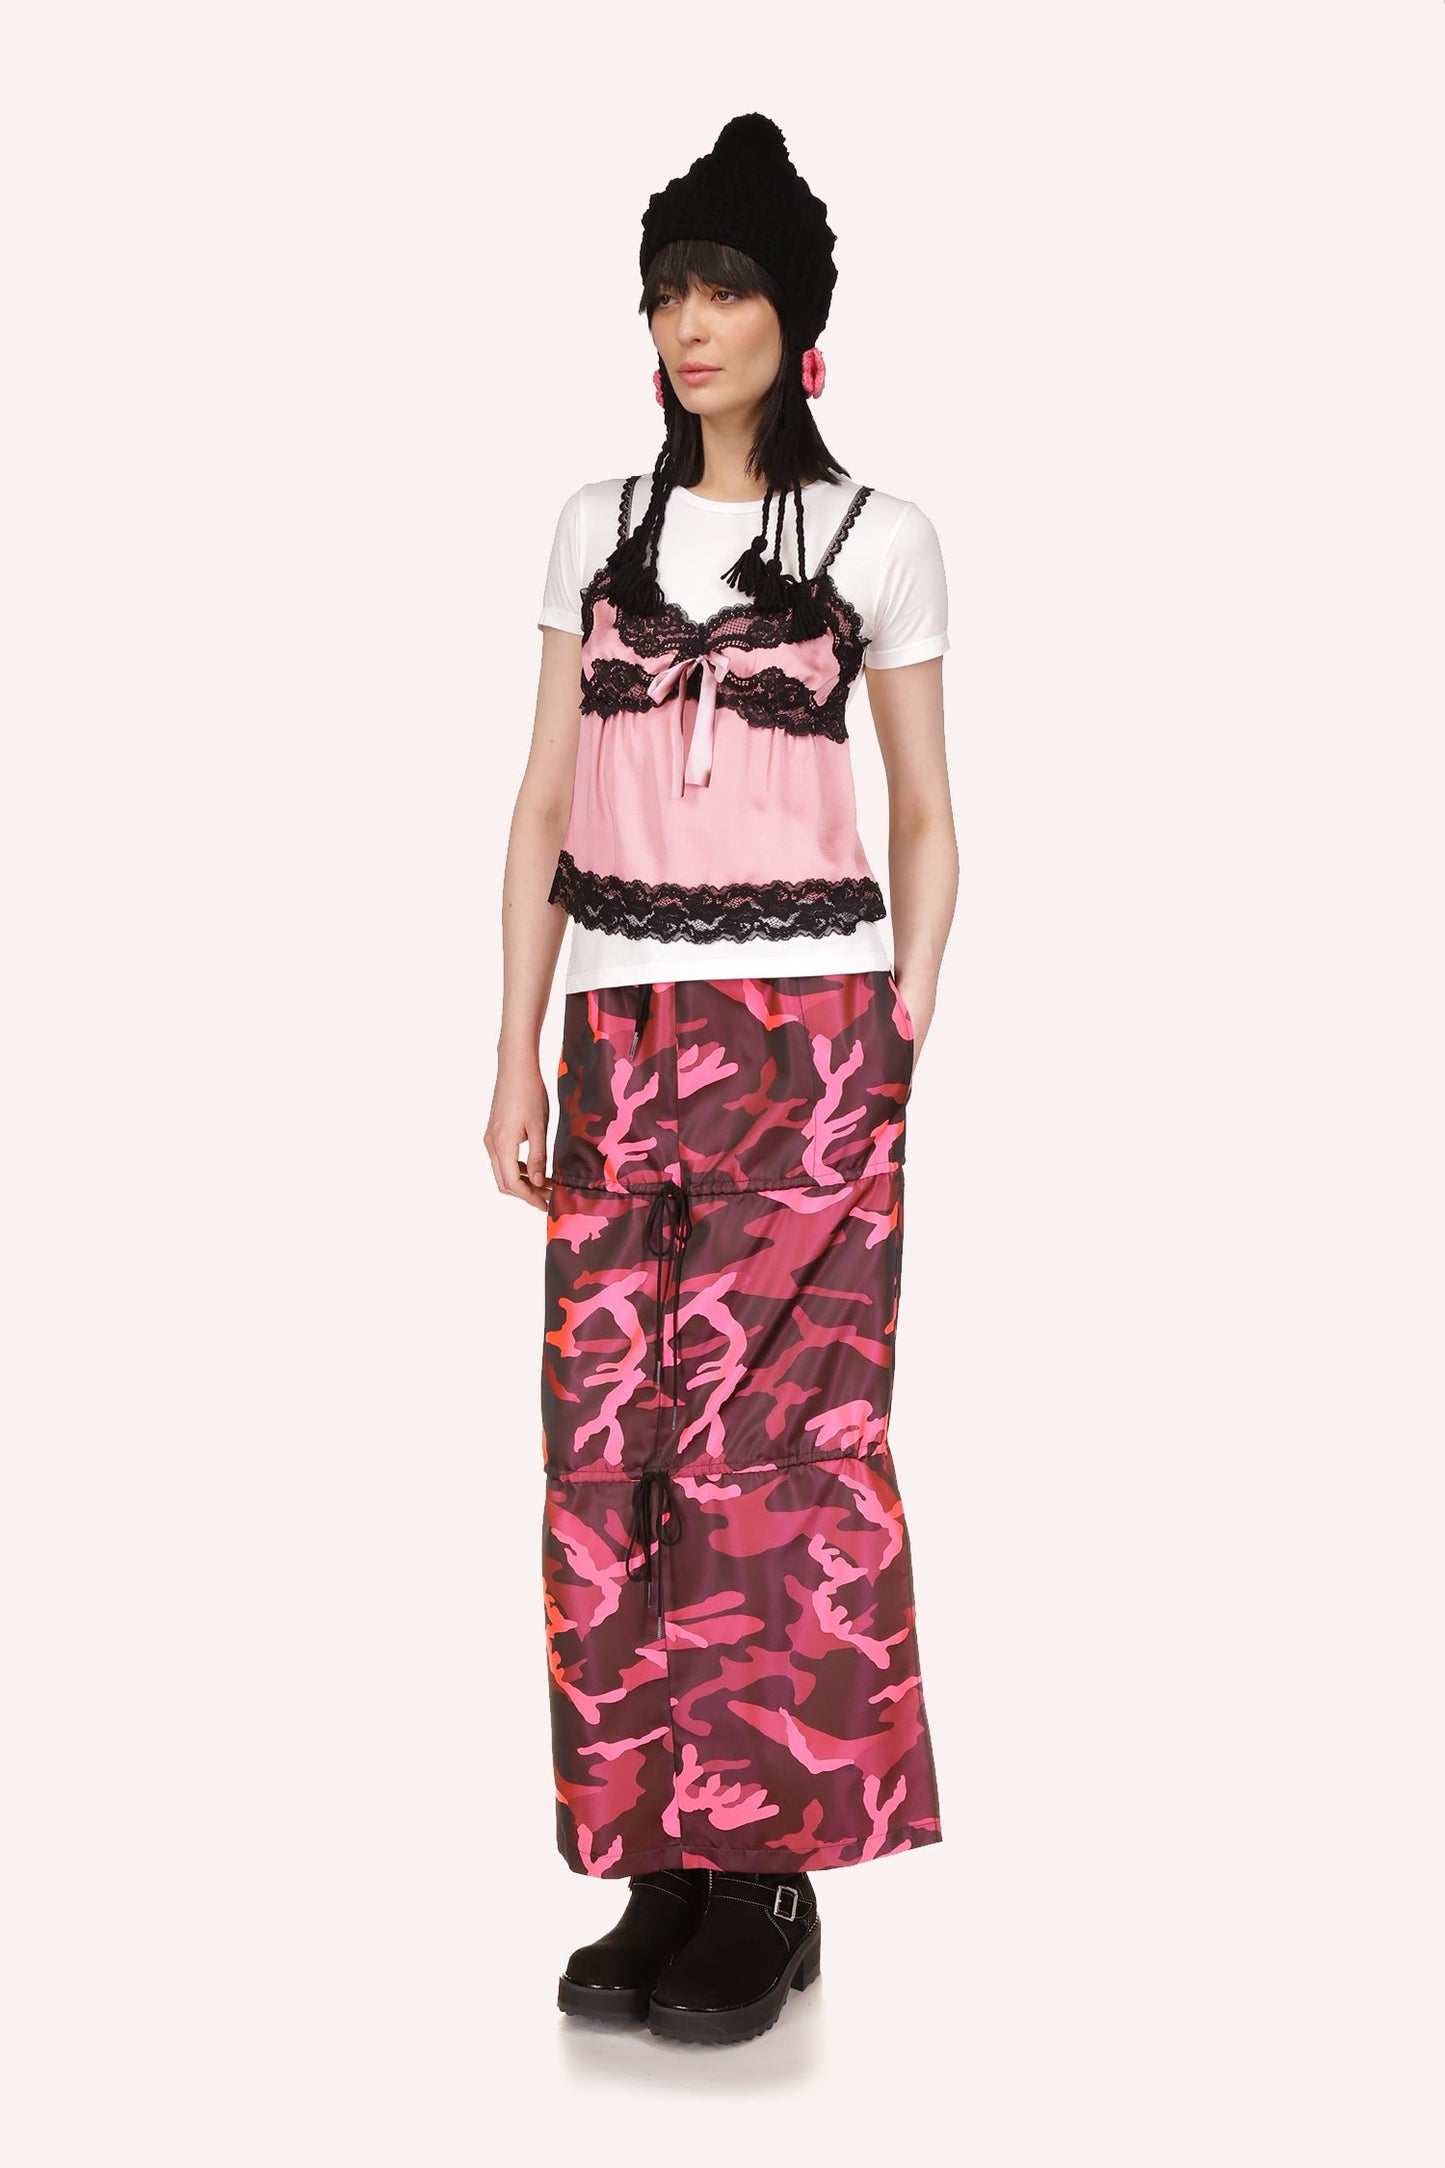 Camouflage skirt, hue of pink top to the bottom, 3 levels, side pocket, 2-laces to adjust